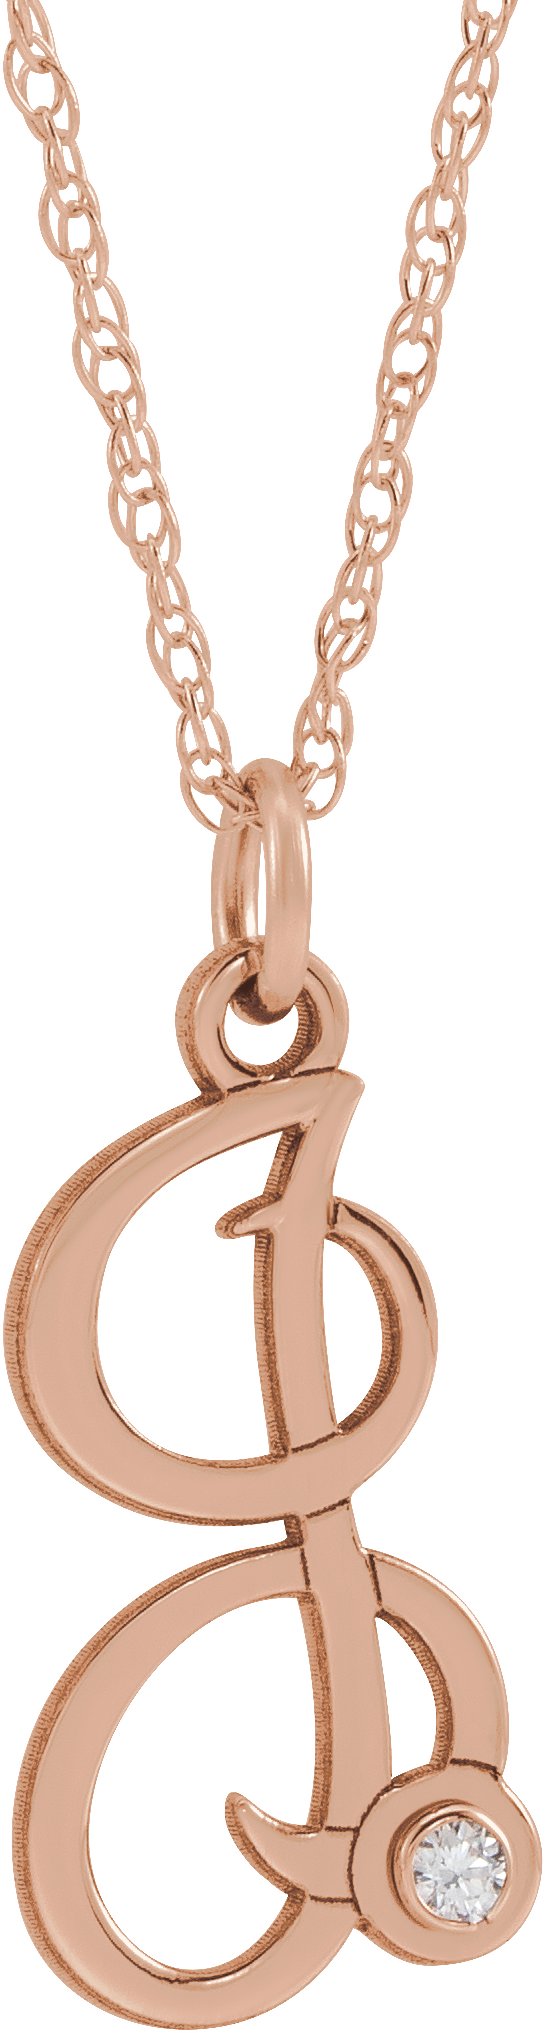 14K Rose Gold-Plated Sterling Silver .02 CT Diamond Script Initial I 16-18" Necklace